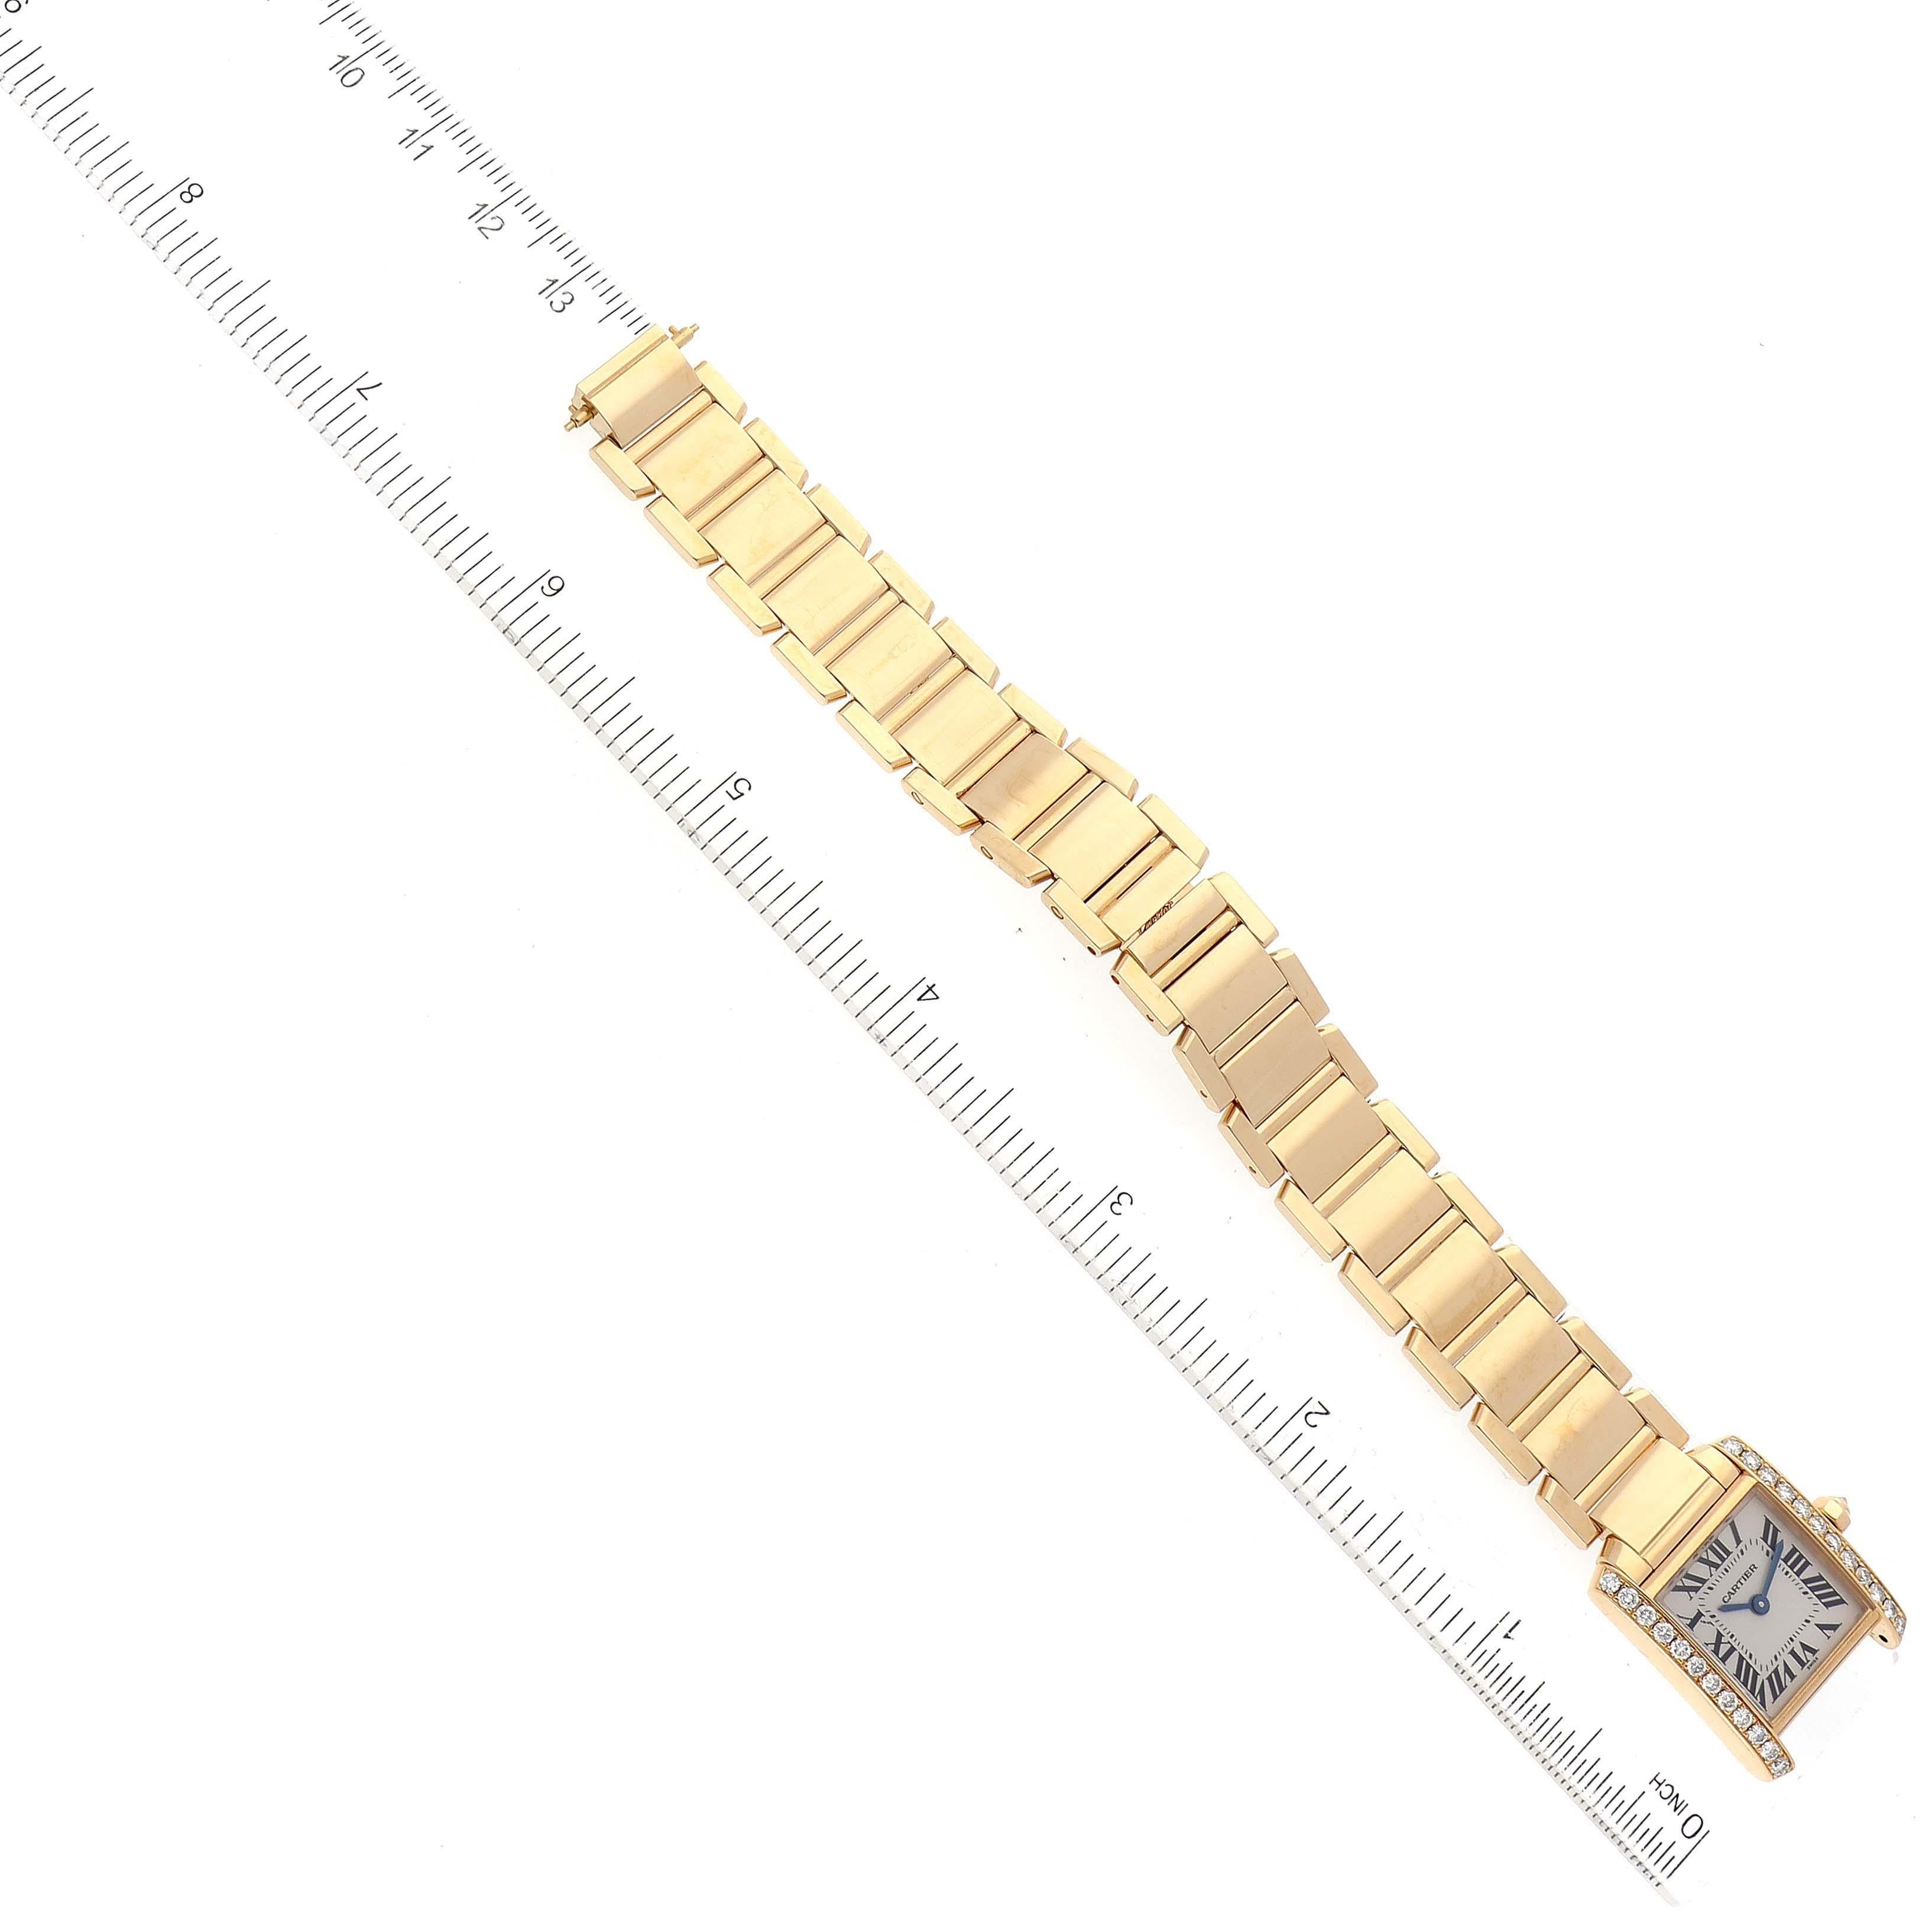 Cartier Tank Francaise Yellow Gold Diamond Ladies Watch WE1001R8 For Sale 3